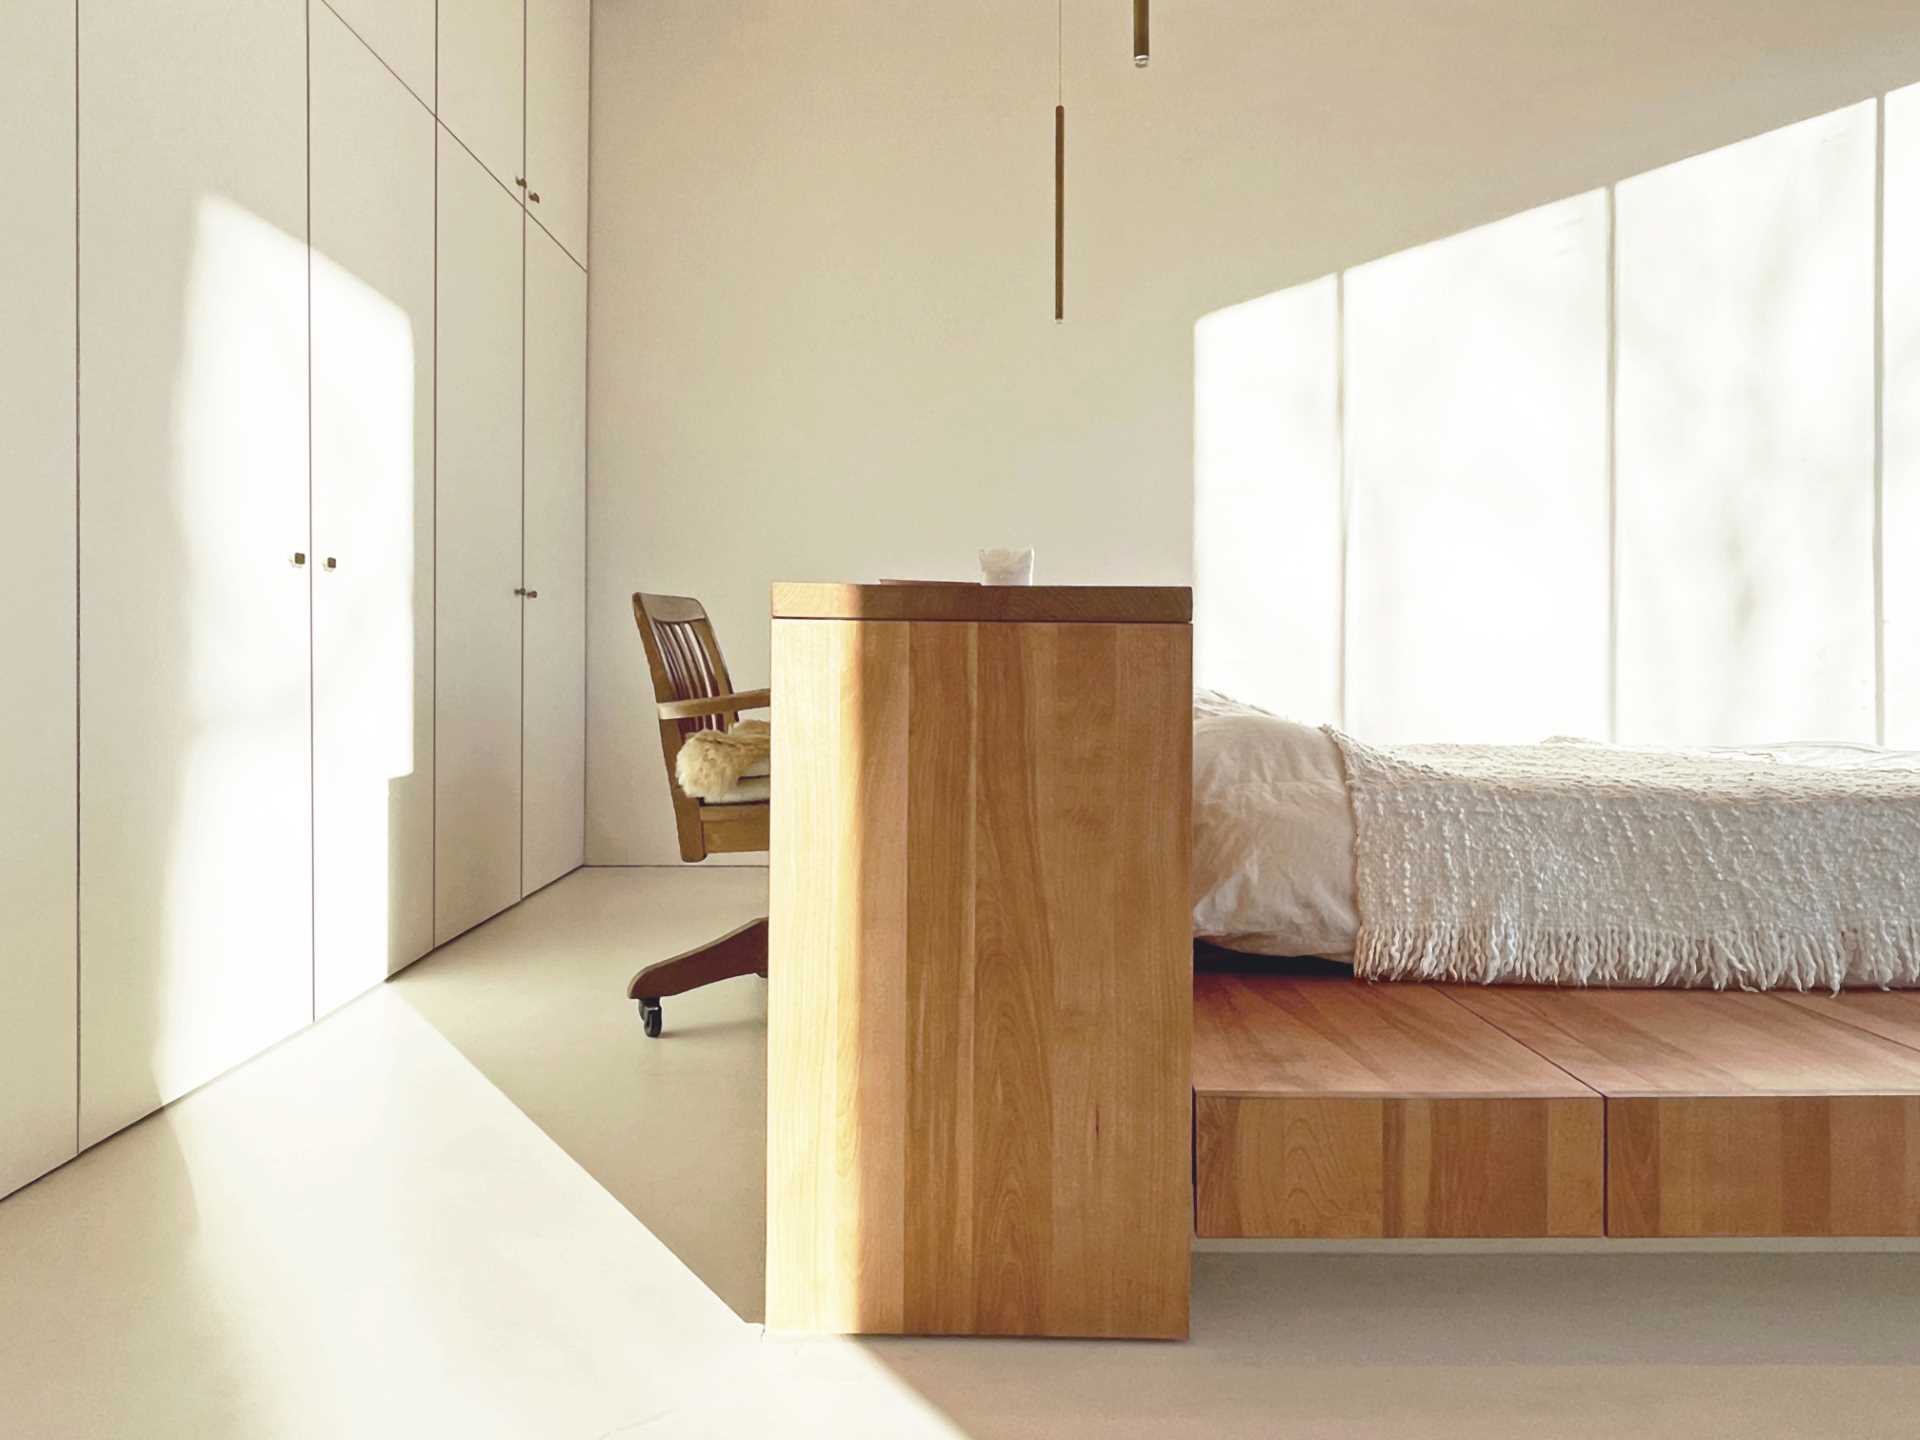 A modern bedroom with a bed frame that includes a desk built into the headboard.